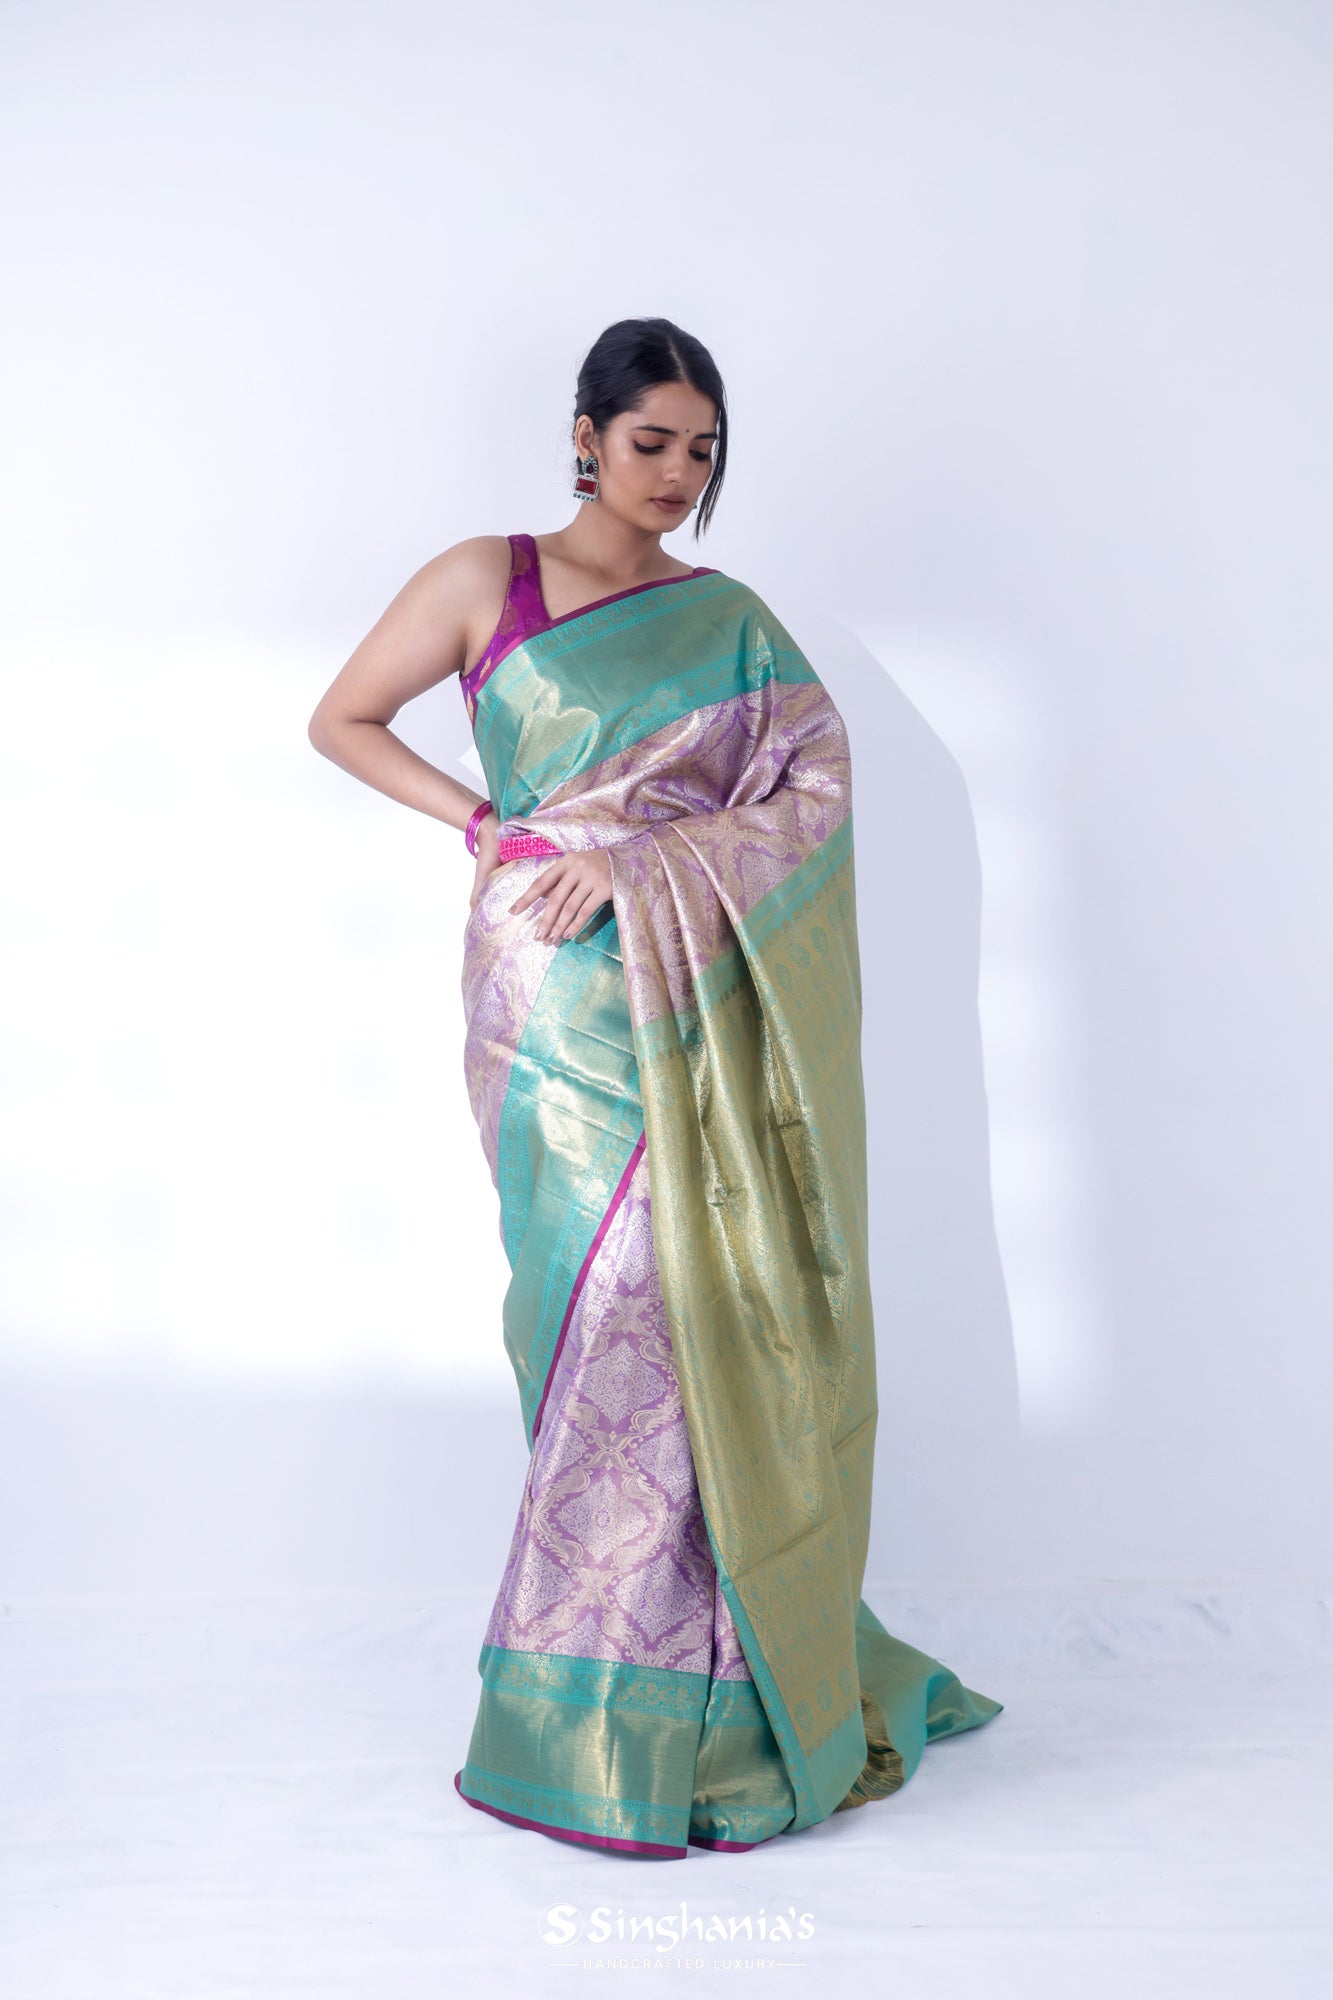 Best silk sarees for women: Find the Best Silk Sarees for Women on  -  The Economic Times